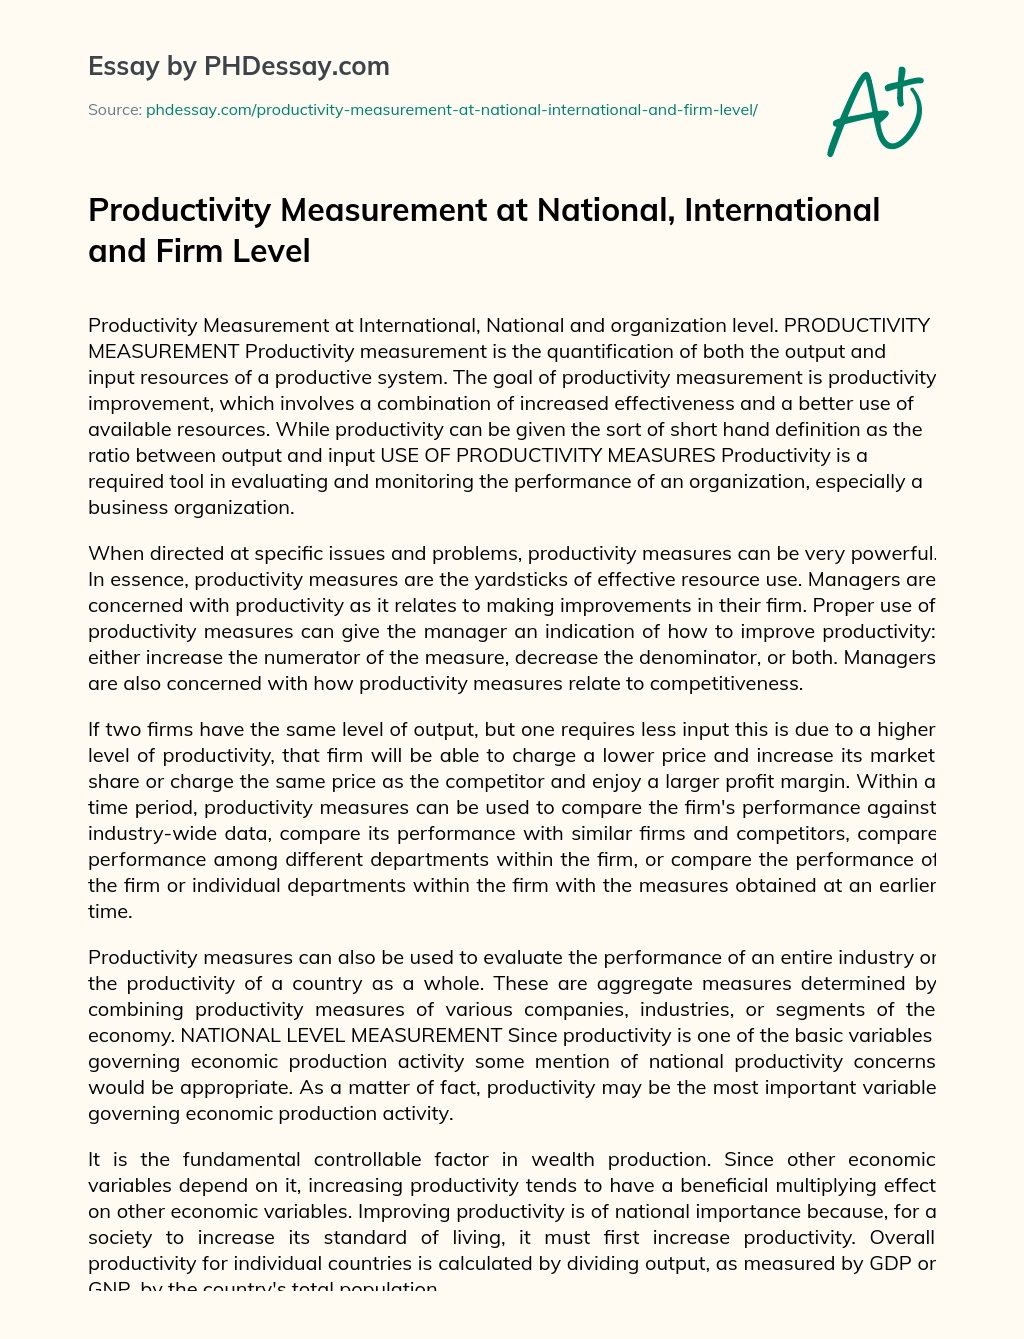 Productivity Measurement at National, International and Firm Level essay